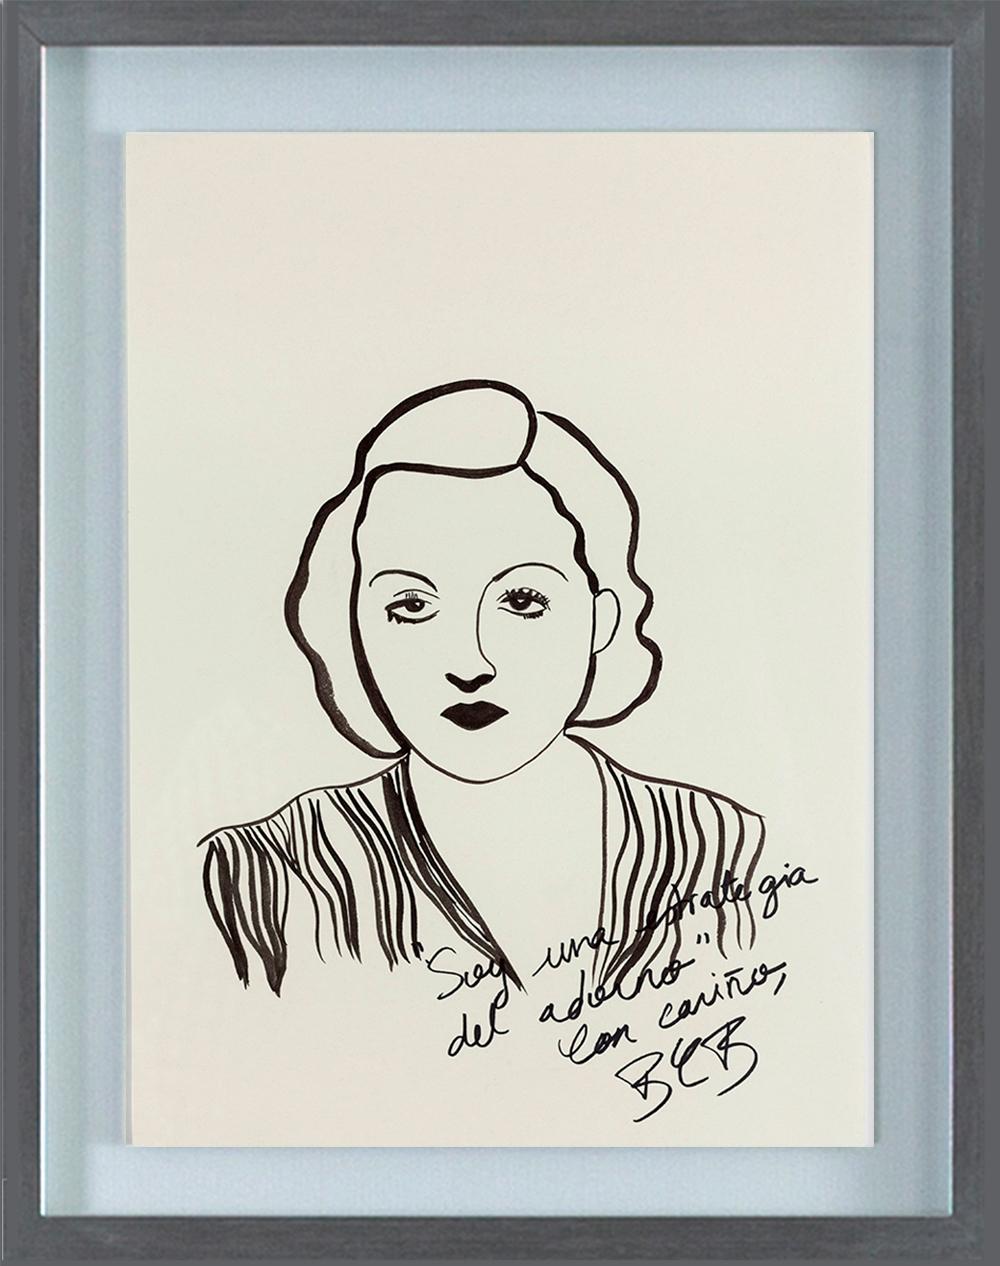 Tallulah Bankhead. Drawing From The Dis-enchanted series  - Art by Paloma Castello